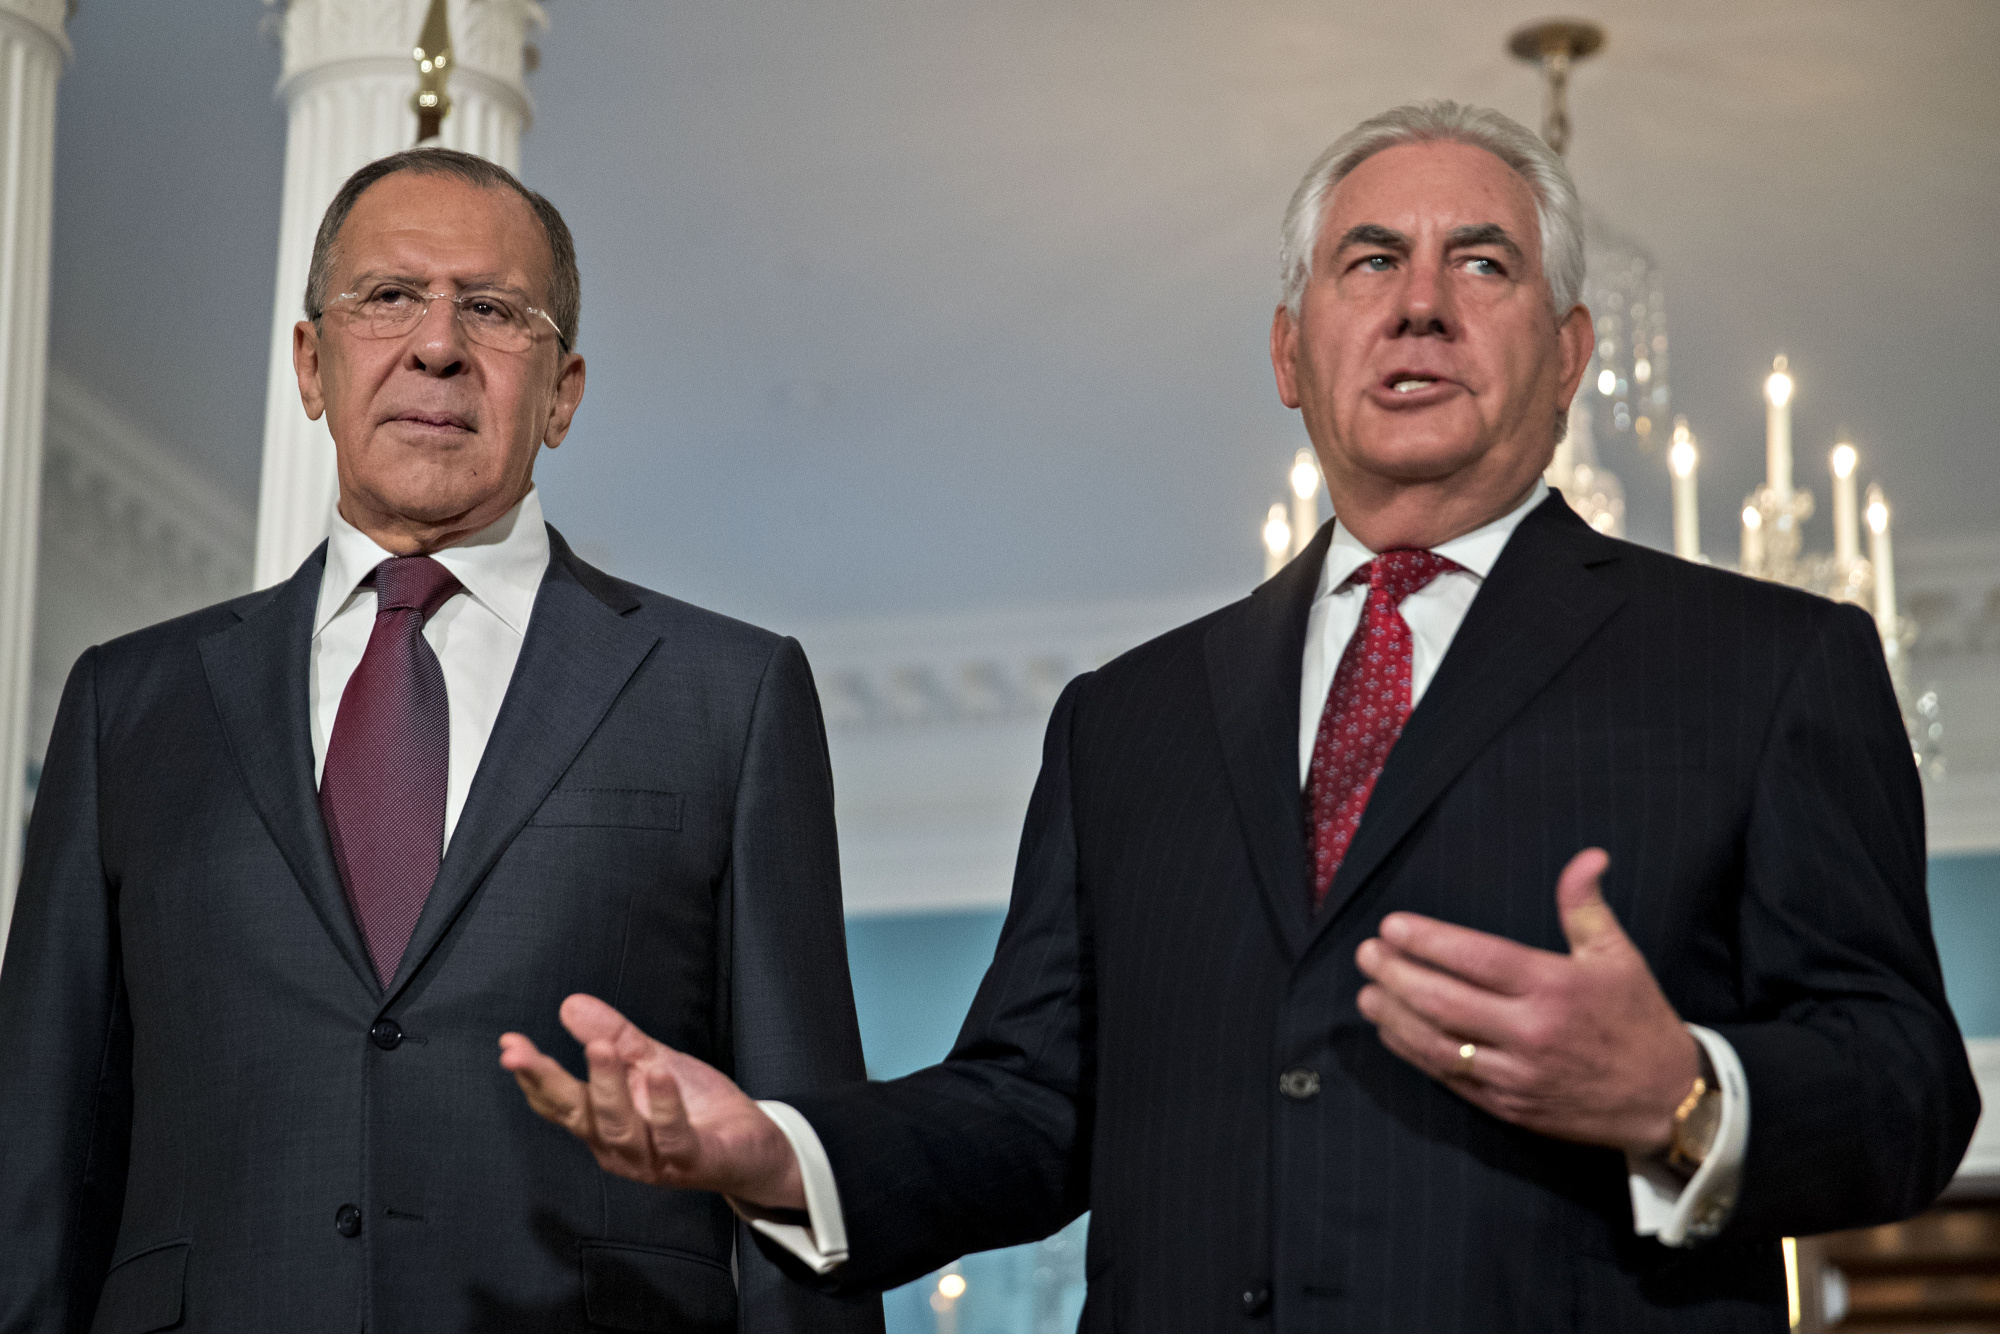 Sergei Lavrov, Russia's foreign minister, left, listens as Rex Tillerson, U.S. Secretary of State, speaks during a photo opportunity at the U.S Department of State in Washington, D.C., on&nbsp;May 10, 2017.&nbsp;